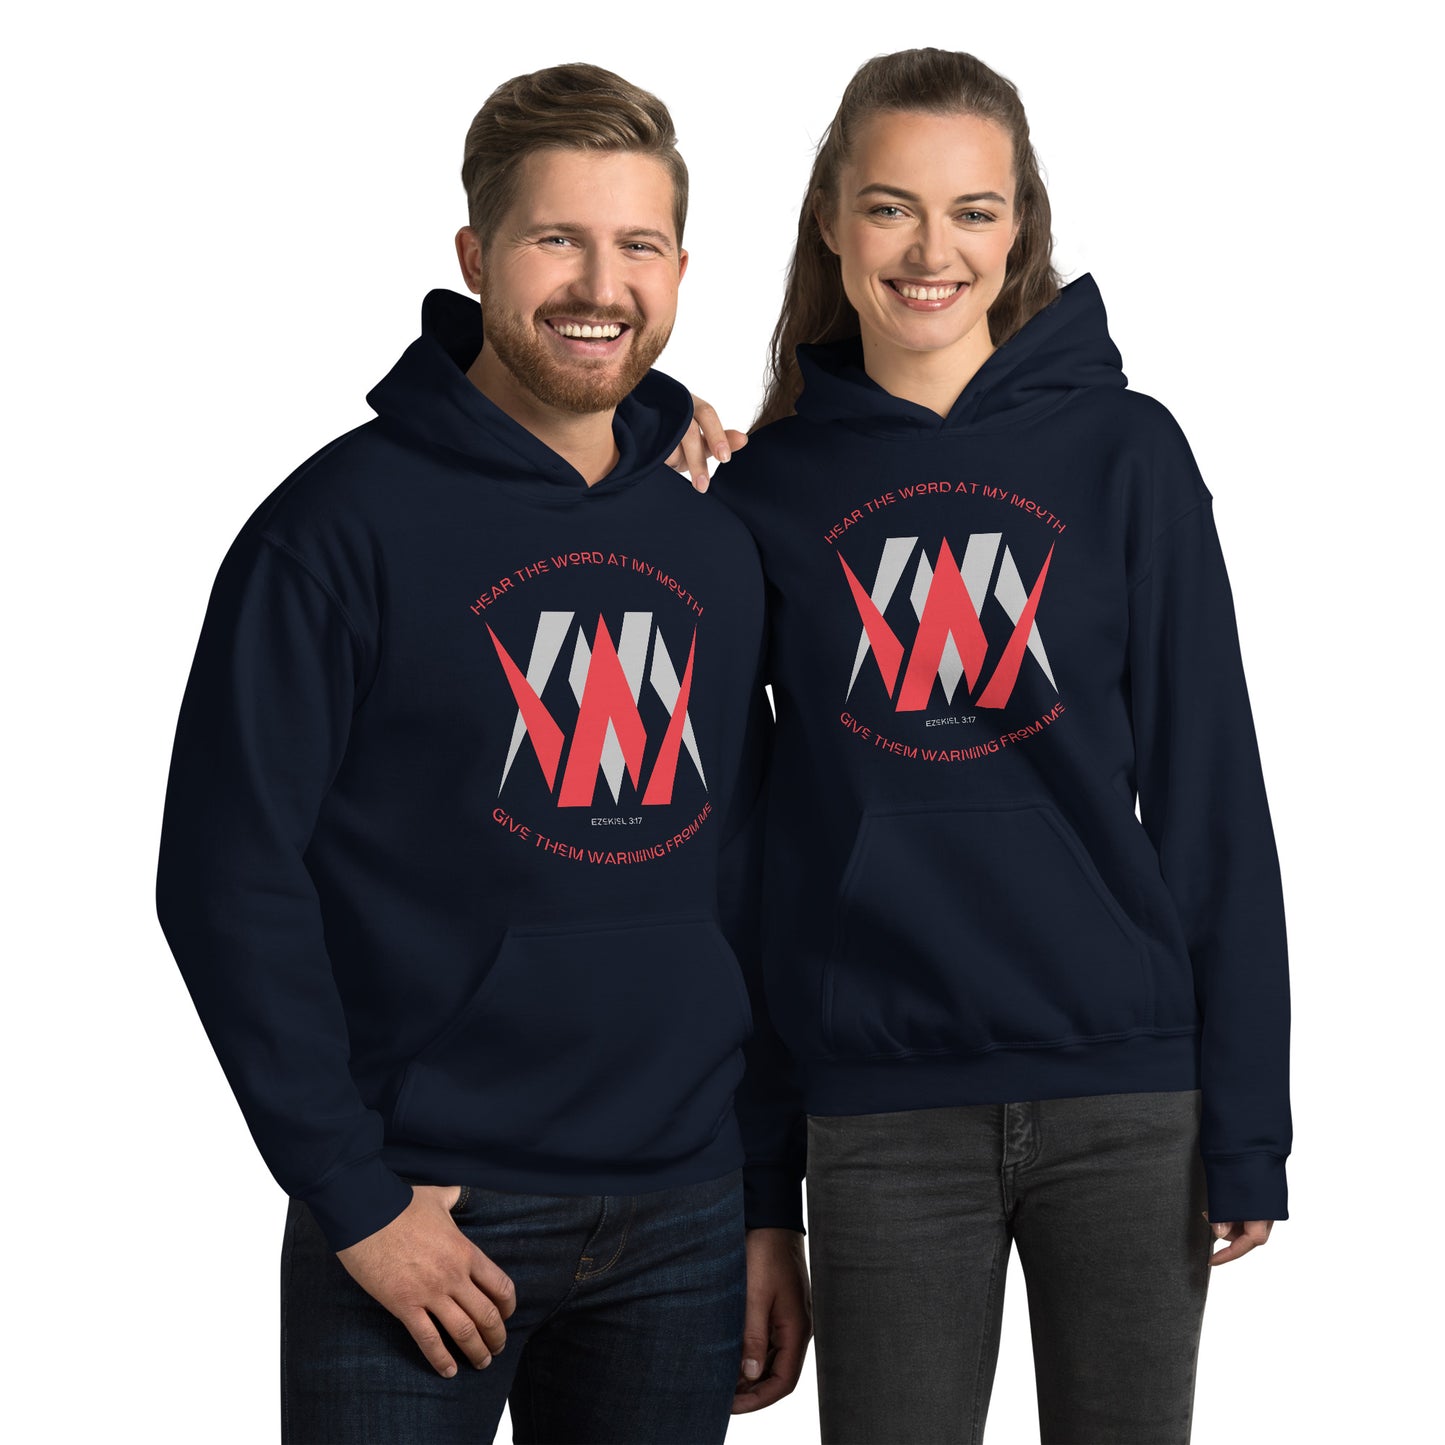 WM Hear The Word At My Mouth Give Them Warning From Me Unisex Hoodie